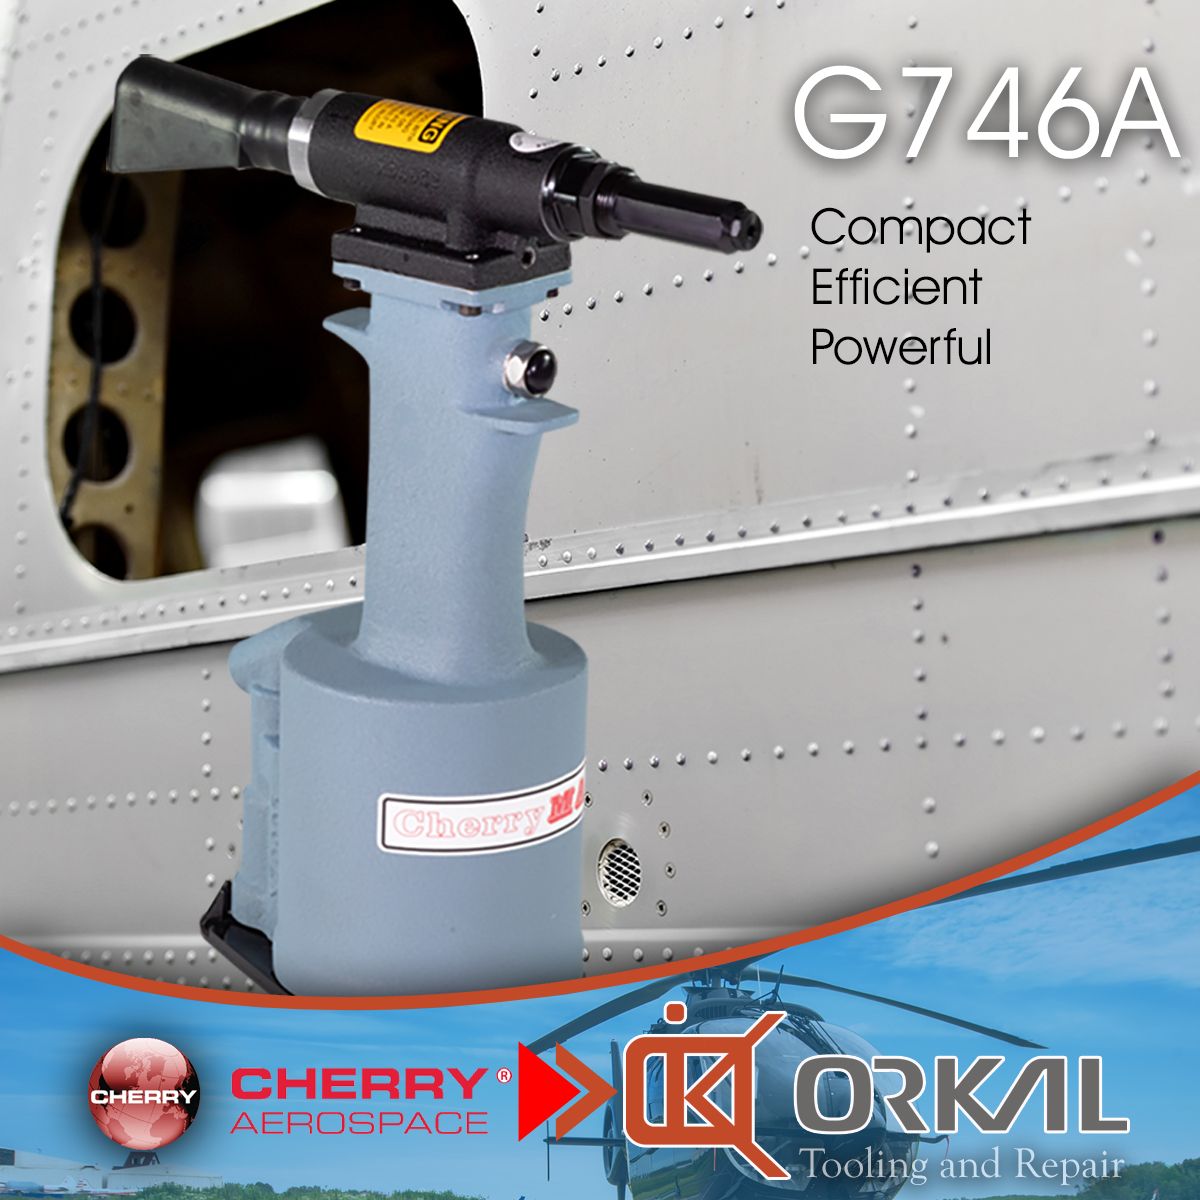 orkal, a pneumatic riveter tool is displayed against an aircraft body with text that reads, "g746a - compact, efficient, powerful." at the bottom of the image are logos for cherry aerospace and orkal tooling and repair.

introducing the cherry g746a riveter. 
your ultimate solution for compact and powerful riveting tasks in aerospace.

orkal industries offers superior tooling, repair services, logistics support, and assembly solutions. ensure compliance with aircraft-grade quality standards.

reliable fittings and fluid transfer systems by orkal industries for efficient aerospace supply chain management.